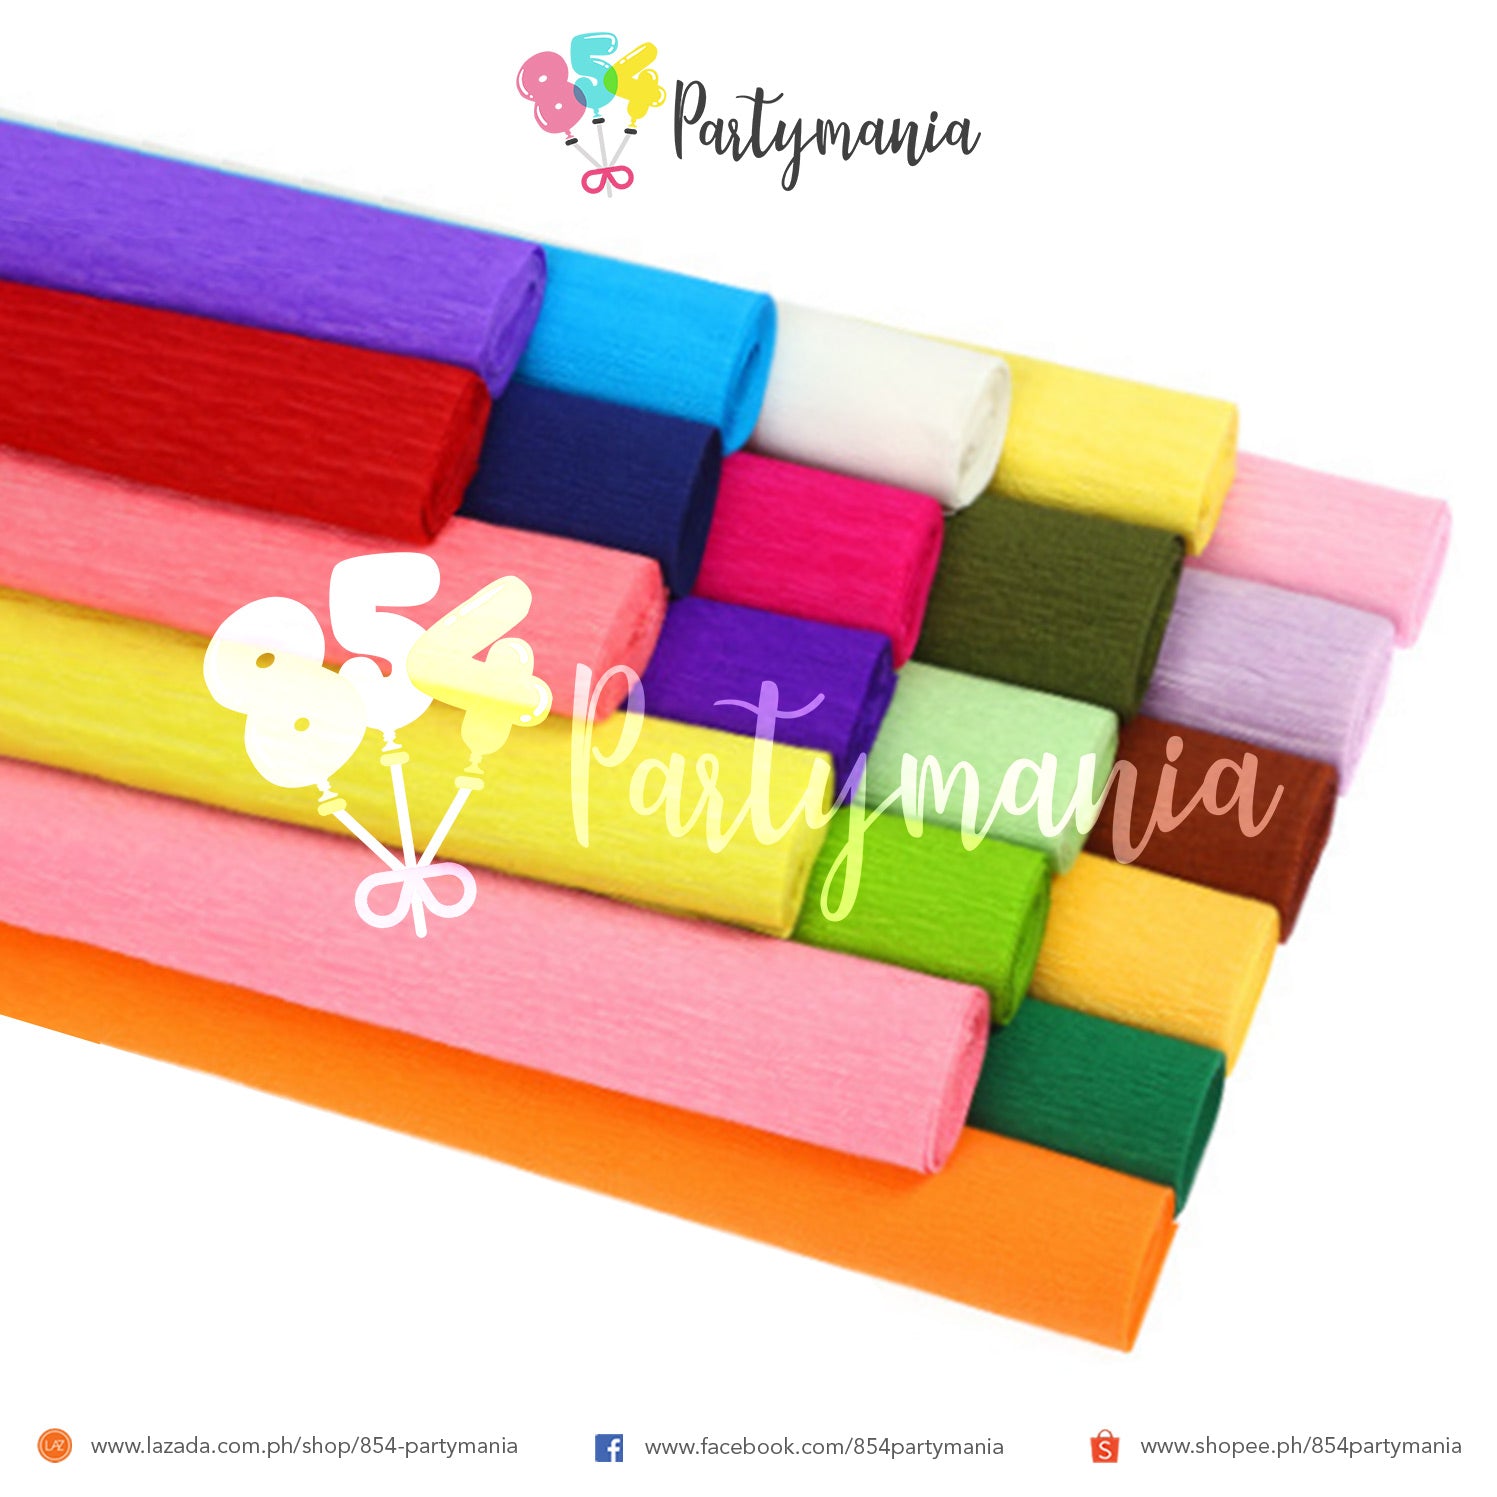 gimboo - Crepe Paper 10 Rolls 50 x 200 cm Assorted / Crepe Tape Colourful  Ribbons Crepe Paper / Ideal for Creative Hobbies / 1 Pack / Assorted  Colours 14113352-99 : : Home & Kitchen